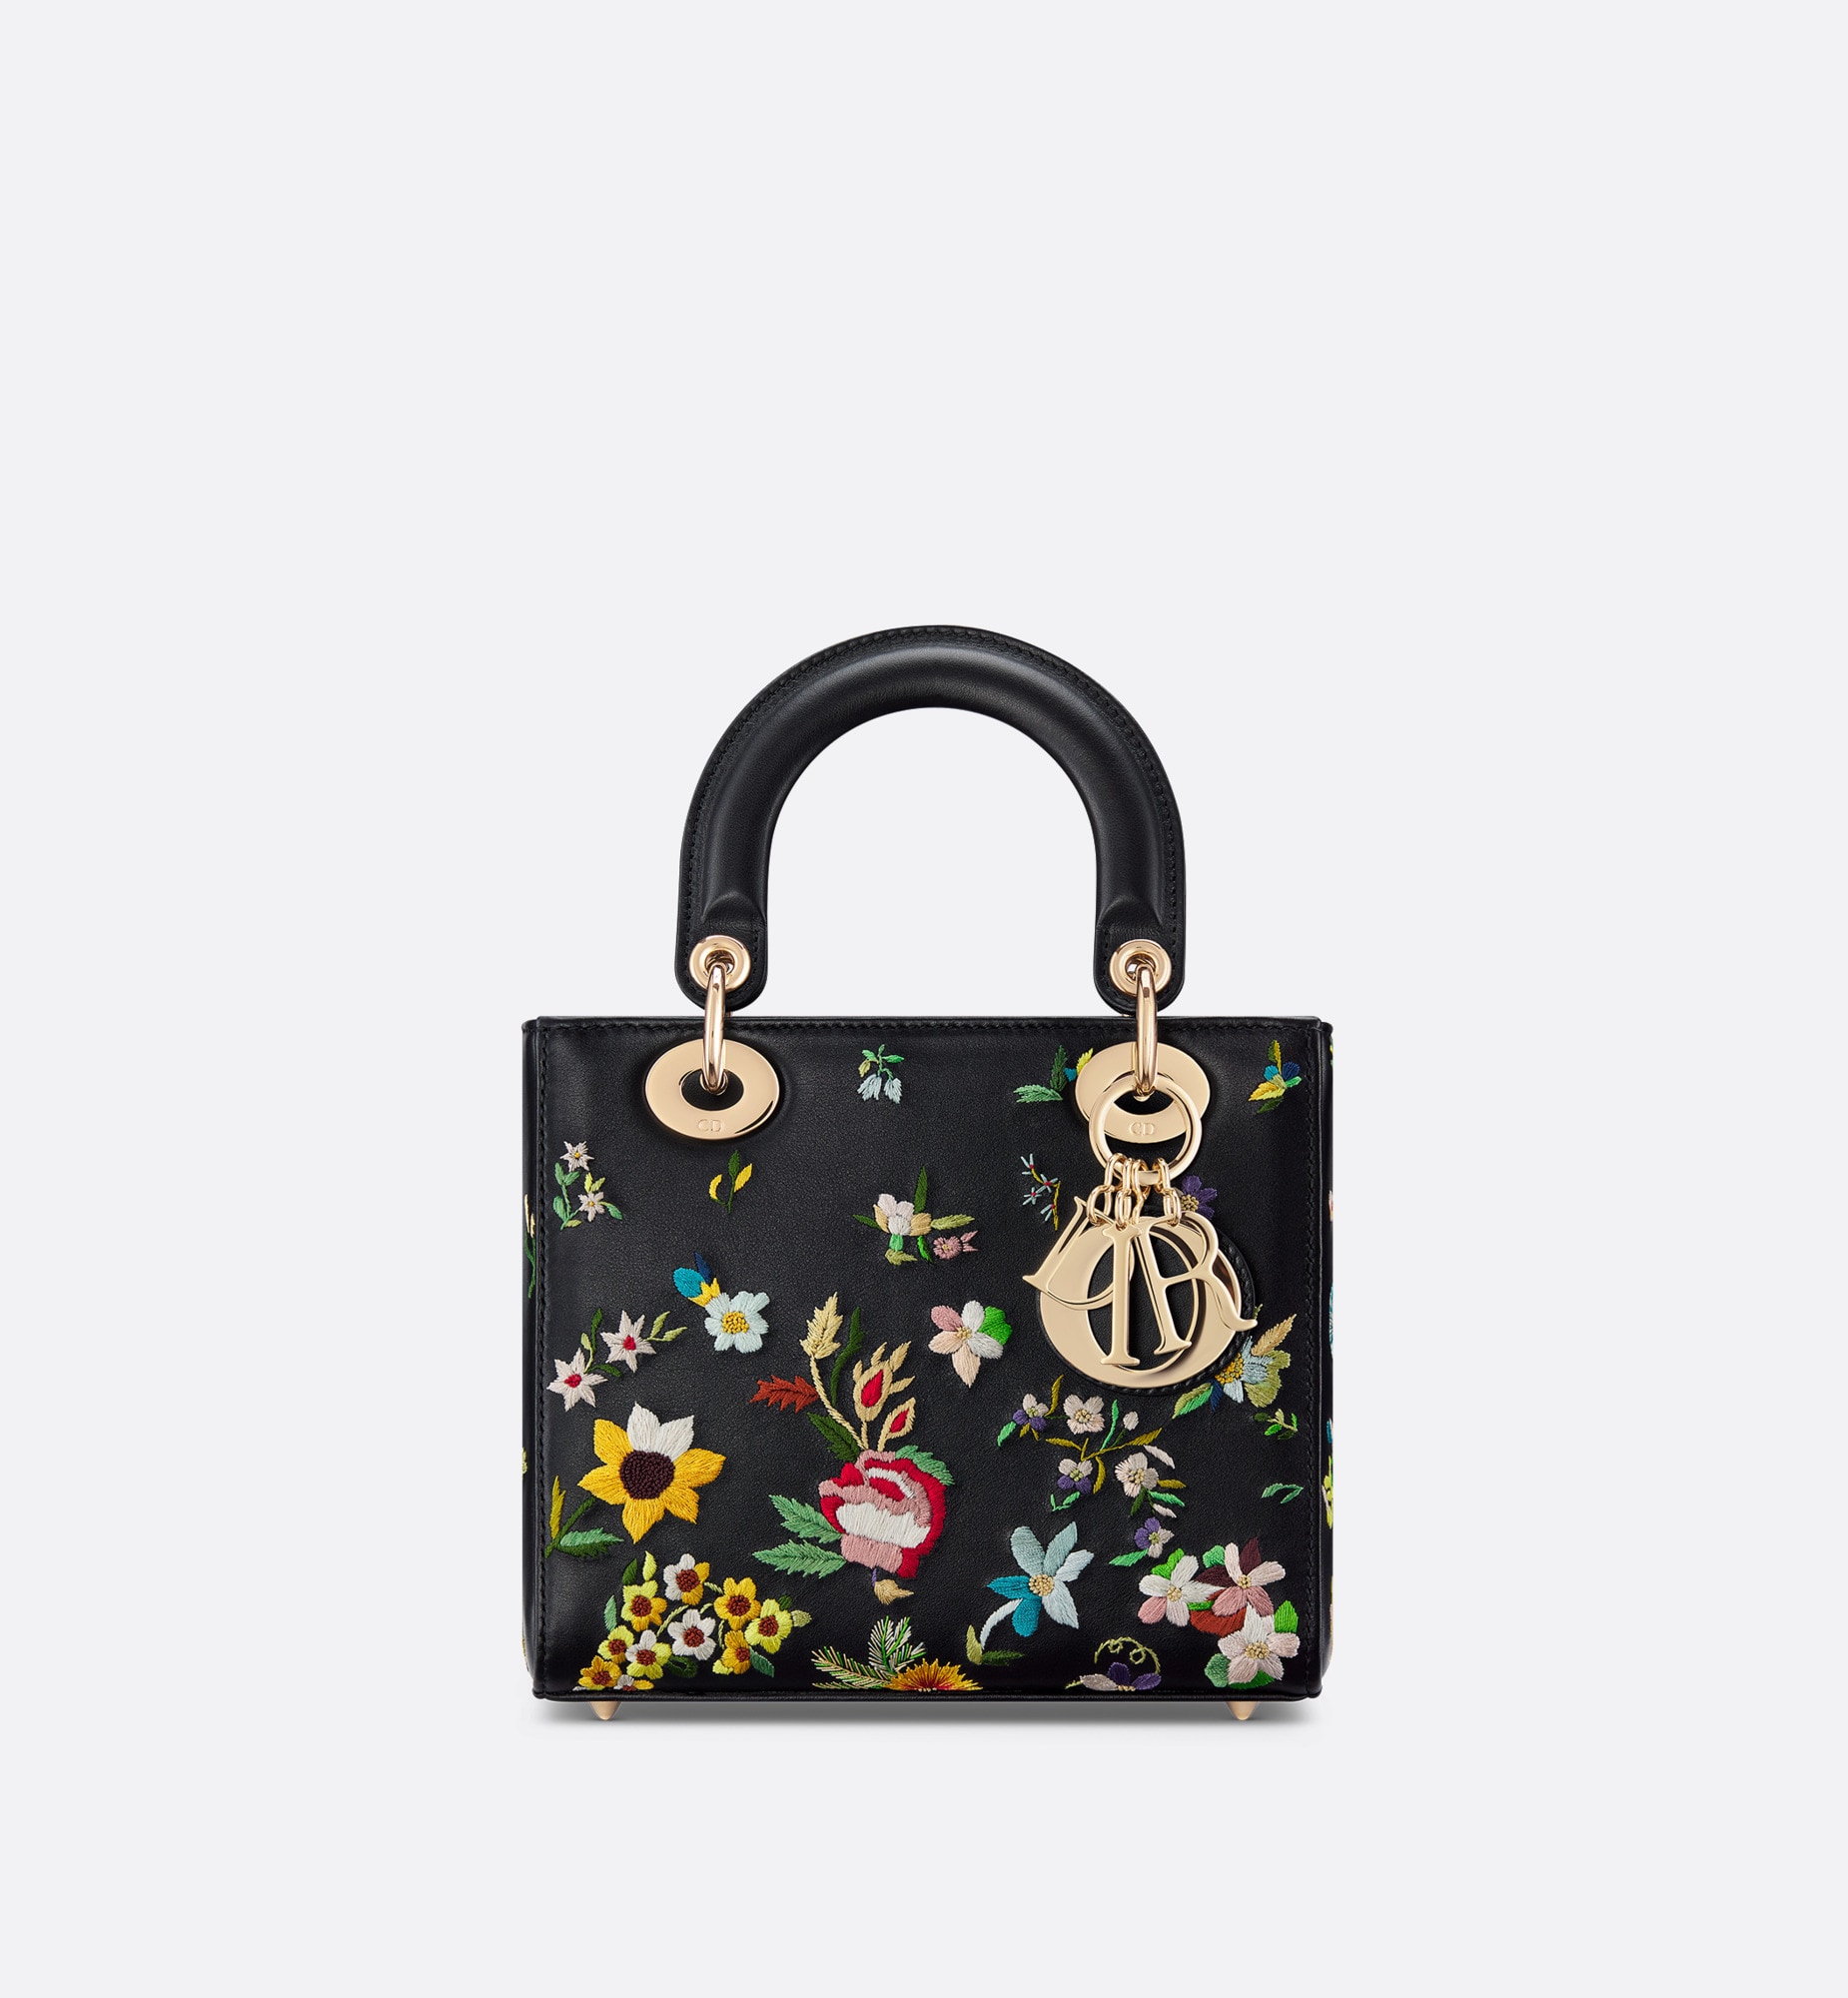 Small Lady Dior Bag Black Calfskin Embroidered with Multicolor Small Flowers